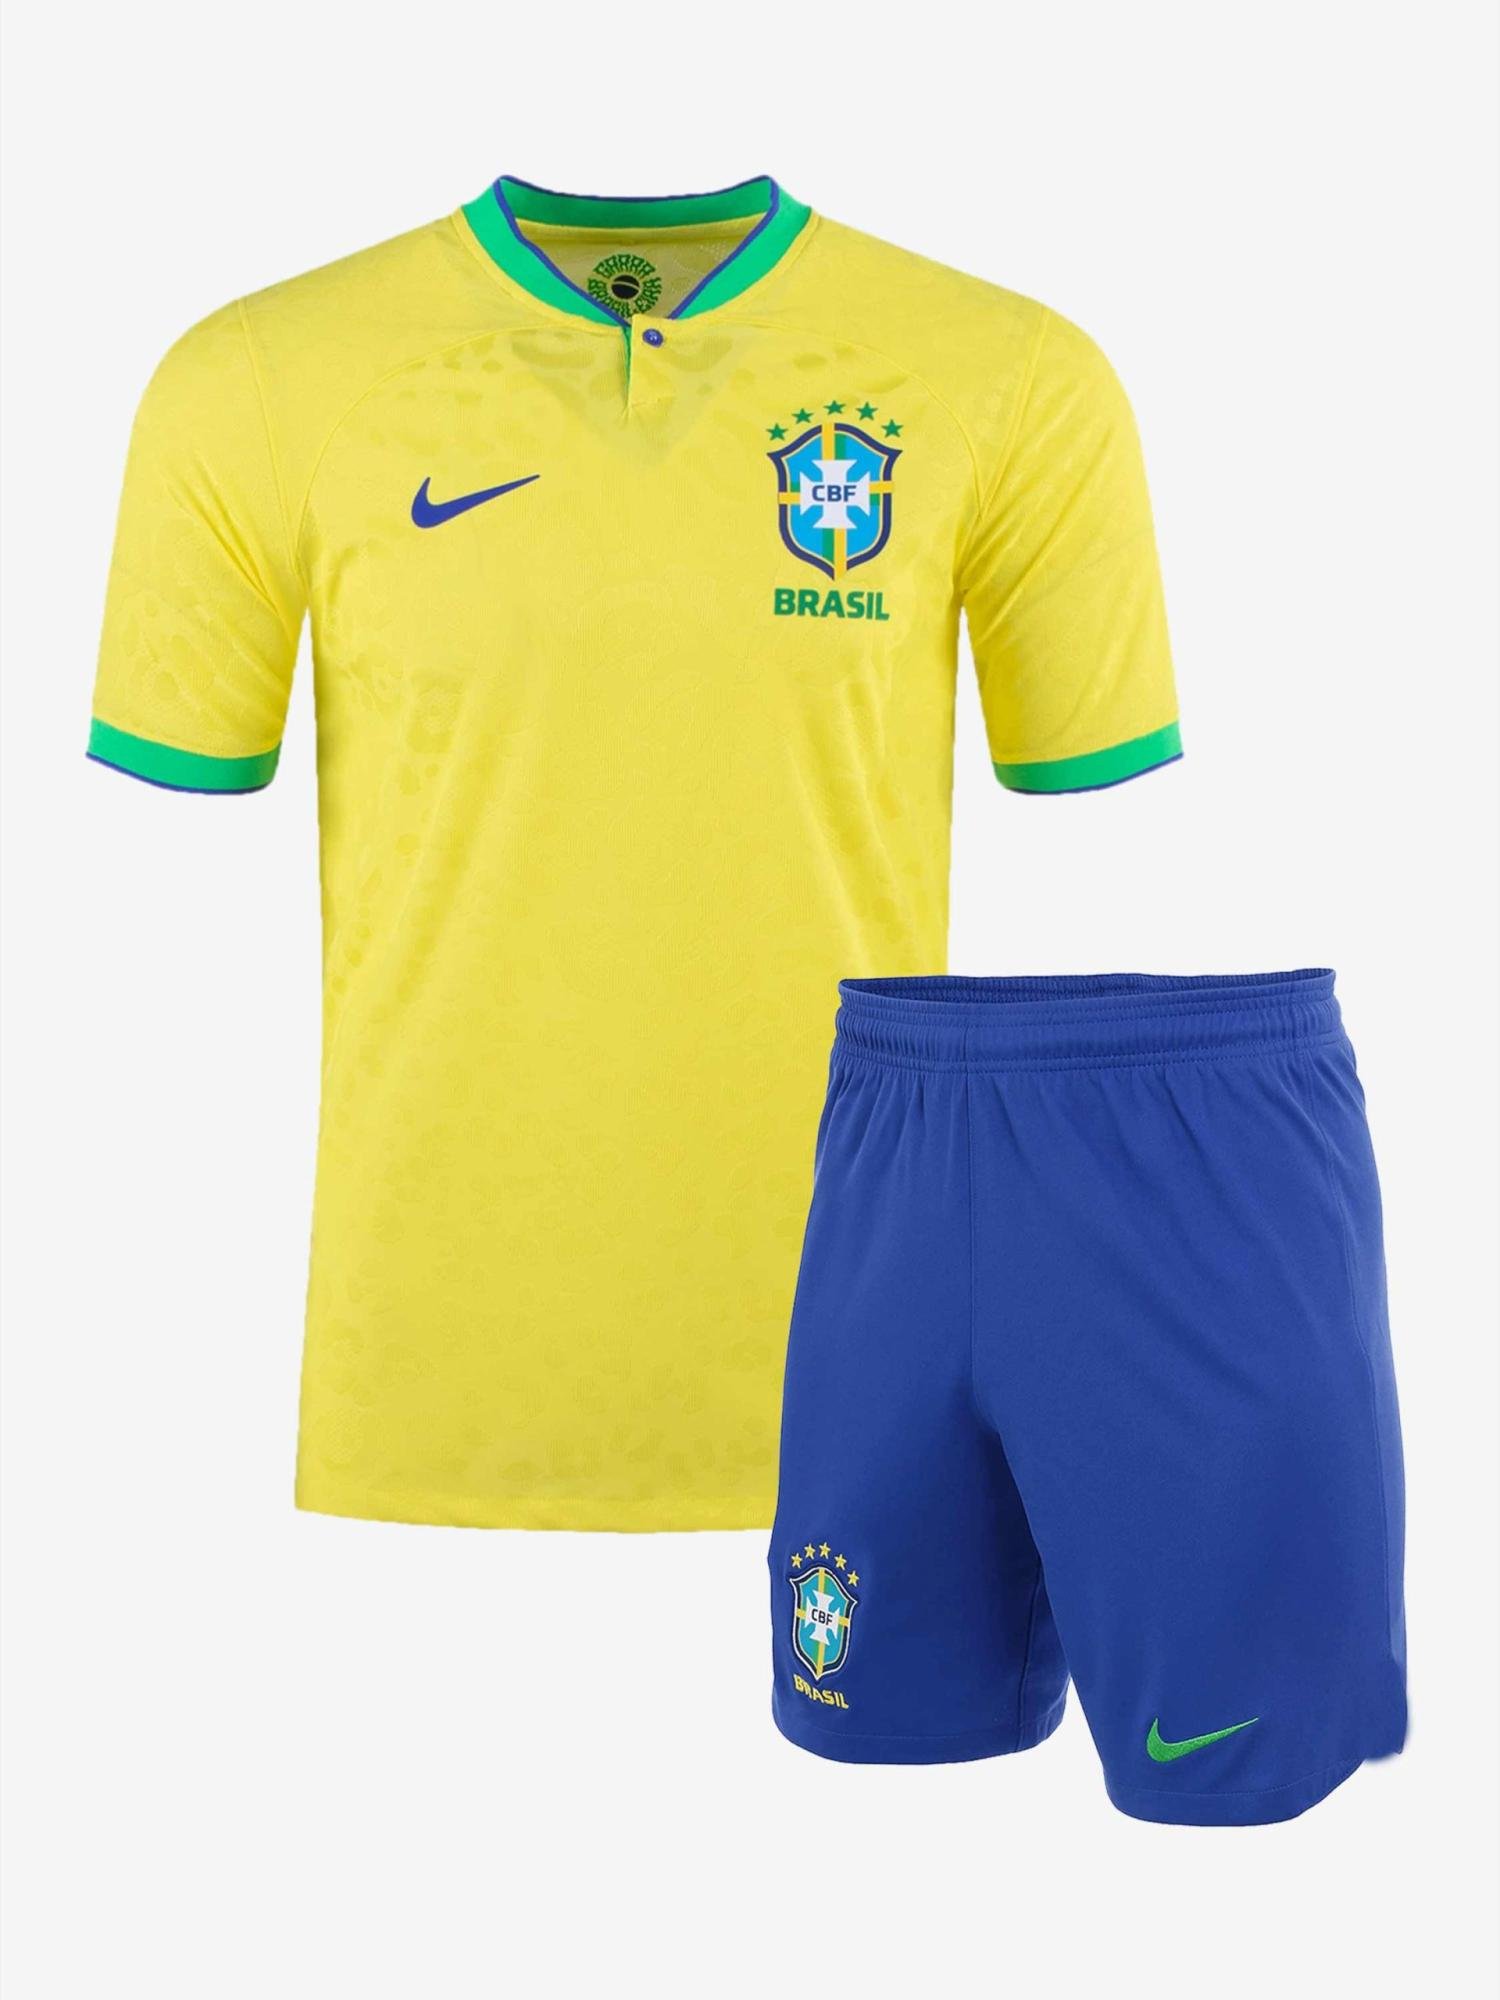 http://zealevince.in/wp-content/uploads/2022/11/Brazil-Home-Foottball-Jersey-And-Shorts-2022-Worldcup-scaled-scaled.jpg